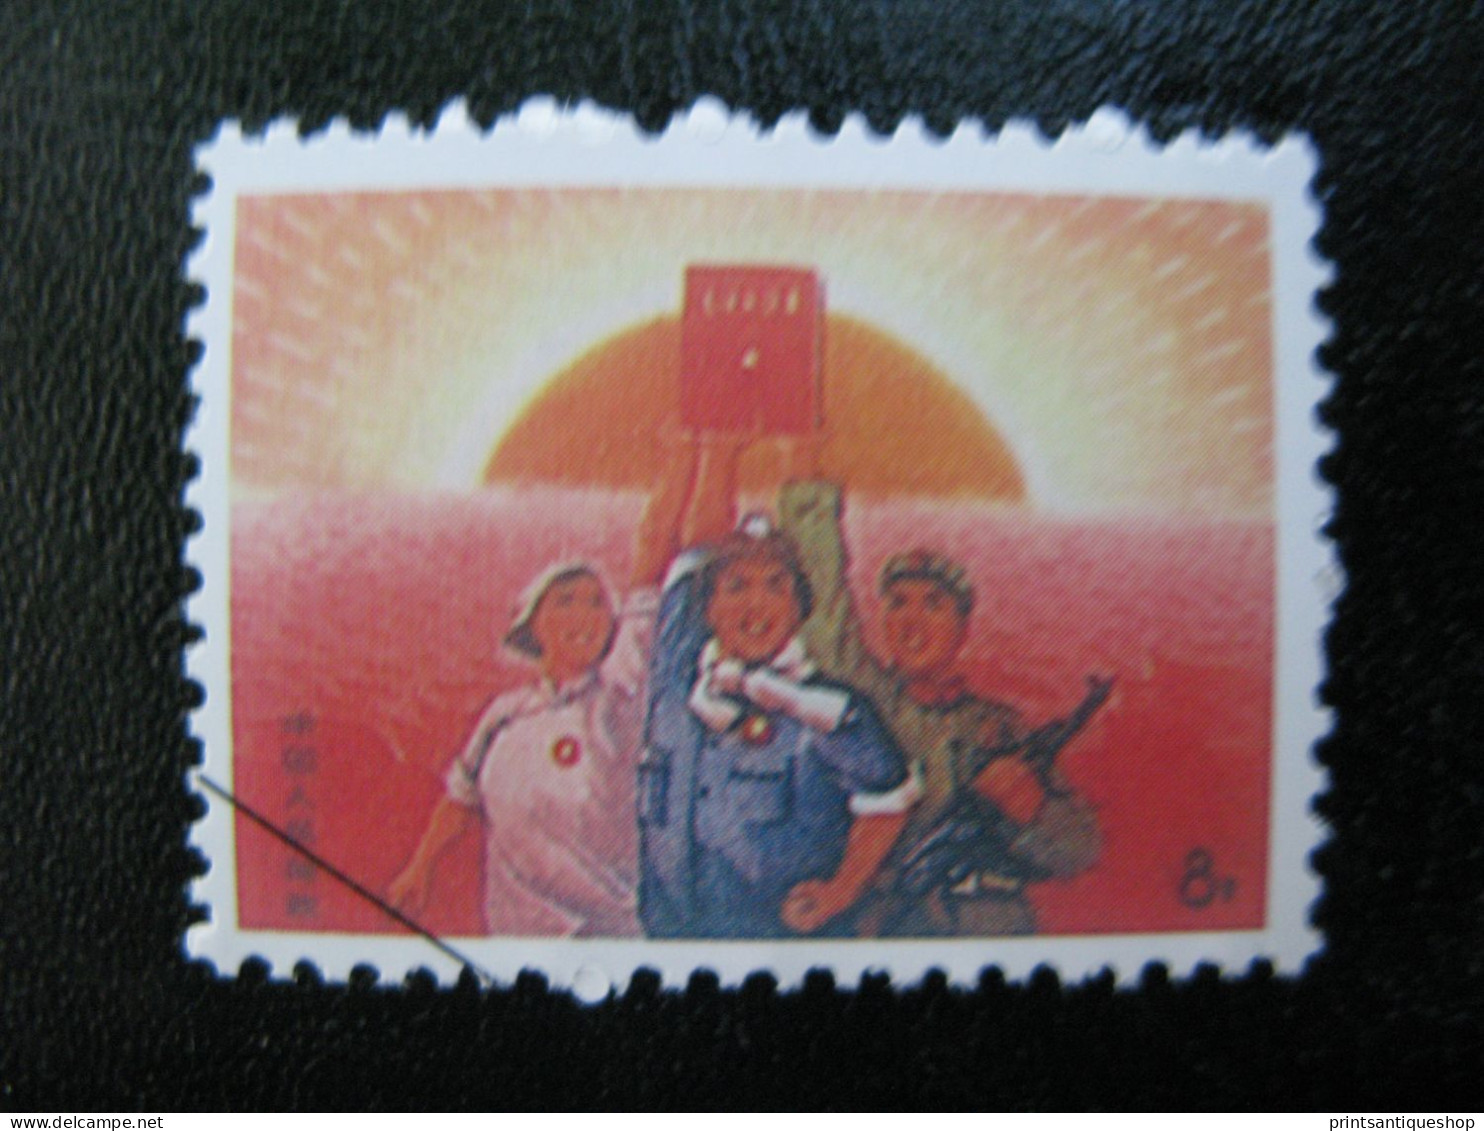 1968 China - Mao Tsé-tung Red Book - Michel #1028 - Used Stamps